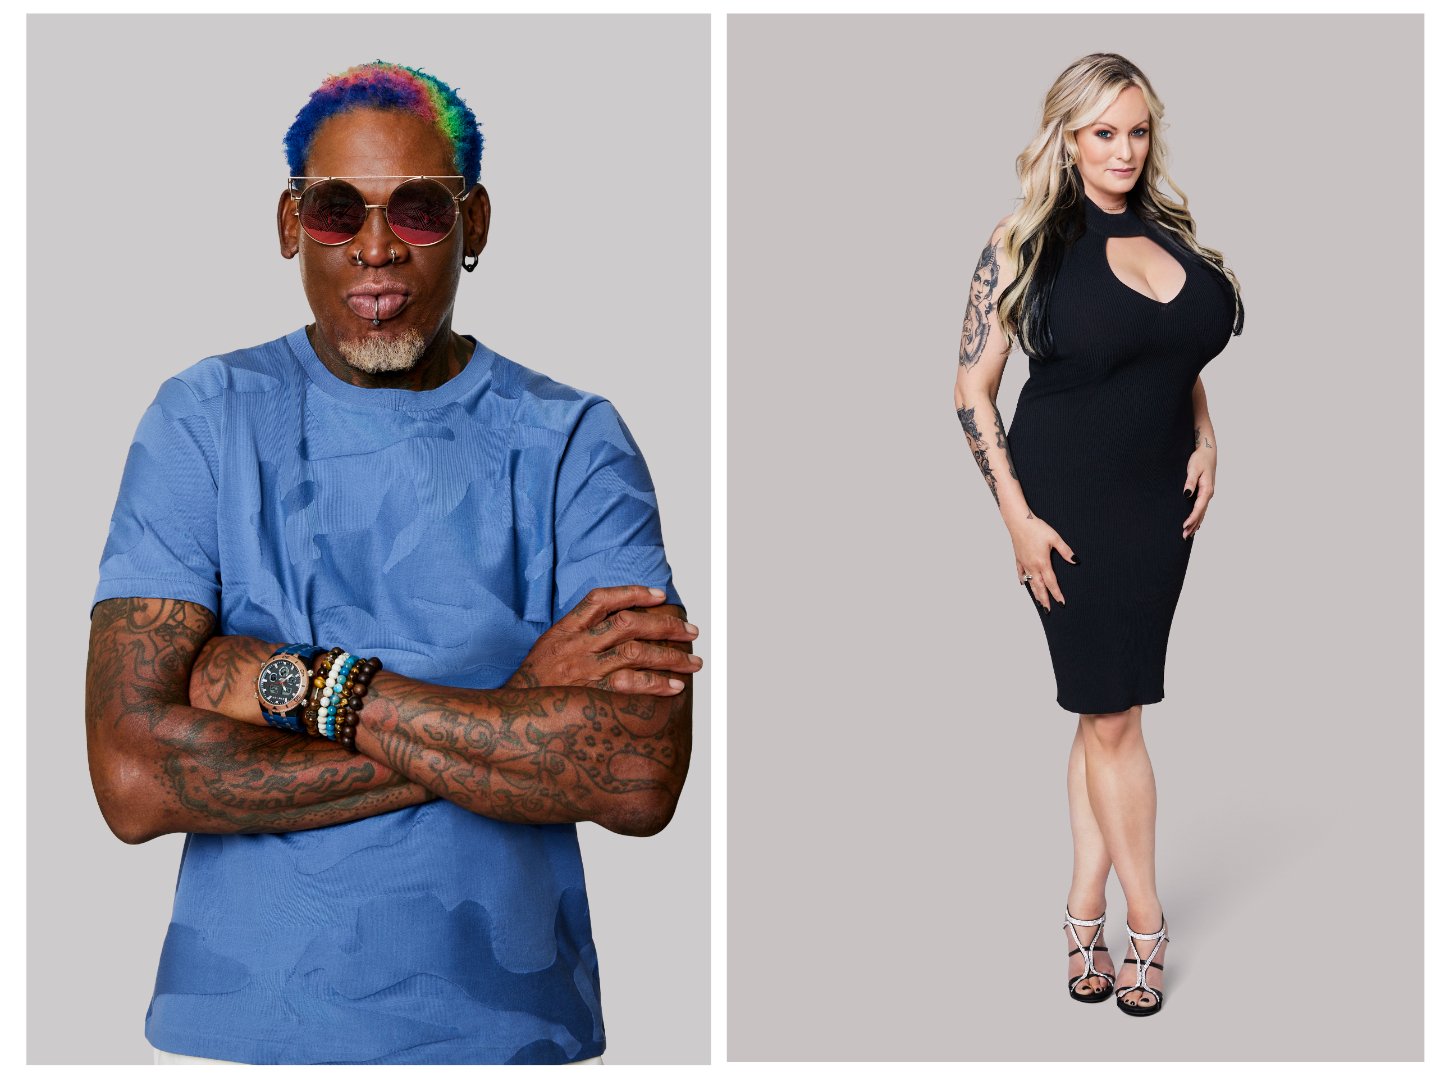 side by side portraits of 'The Surreal Life' cast members Dennis Rodman and Stormy Daniels